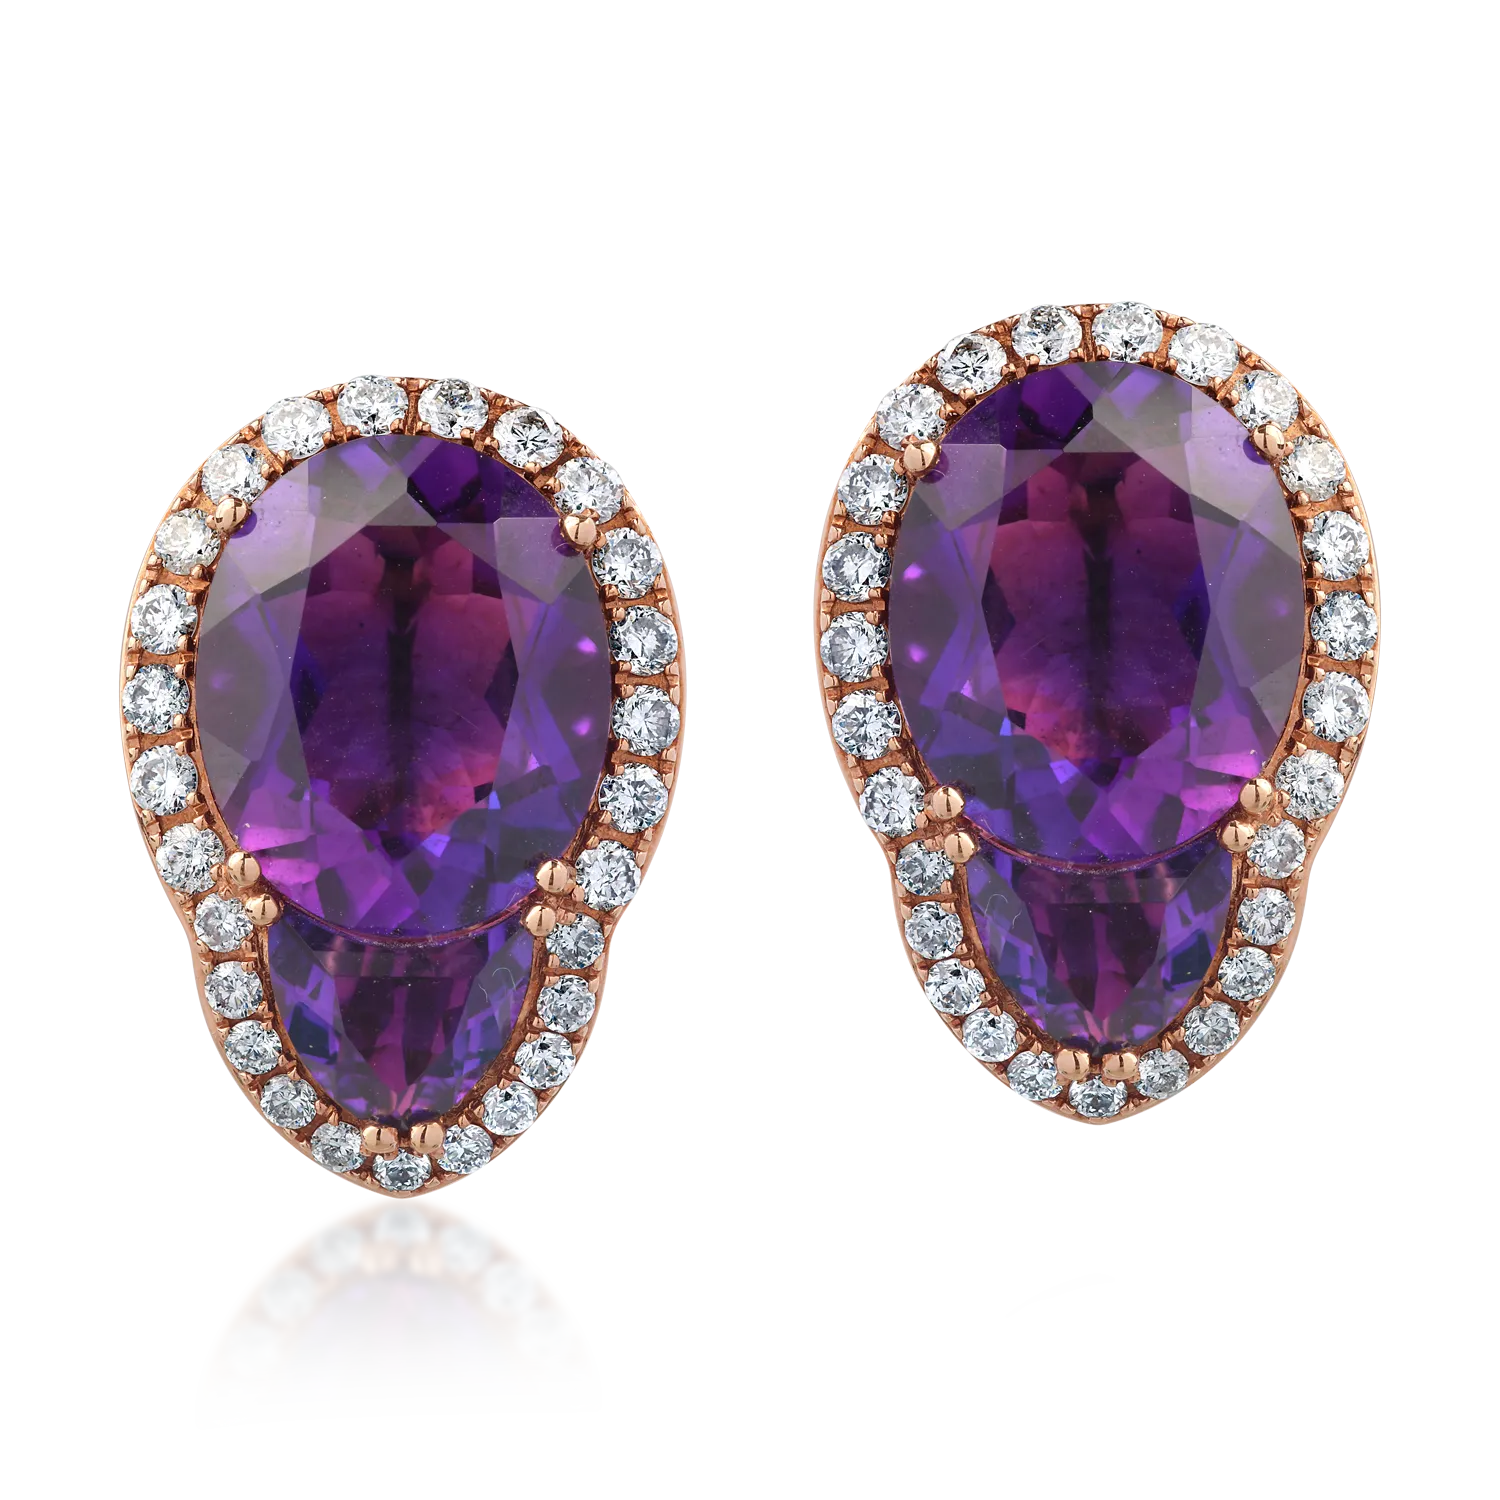 18K rose gold earrings with 6.19ct amethysts and 0.88ct diamonds